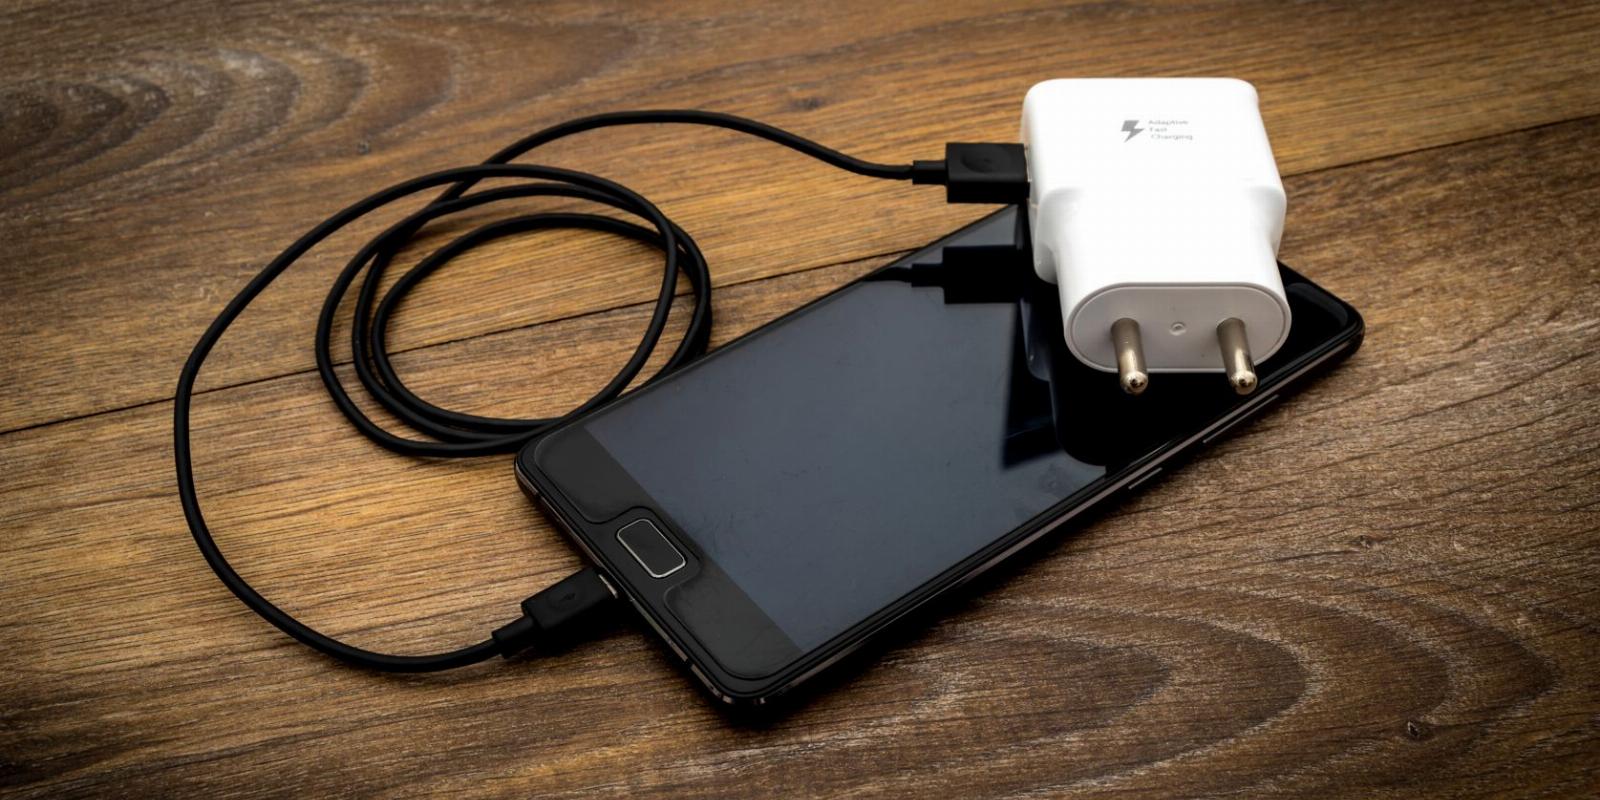 11 Smartphone Charging Habits That Will Improve Battery Life